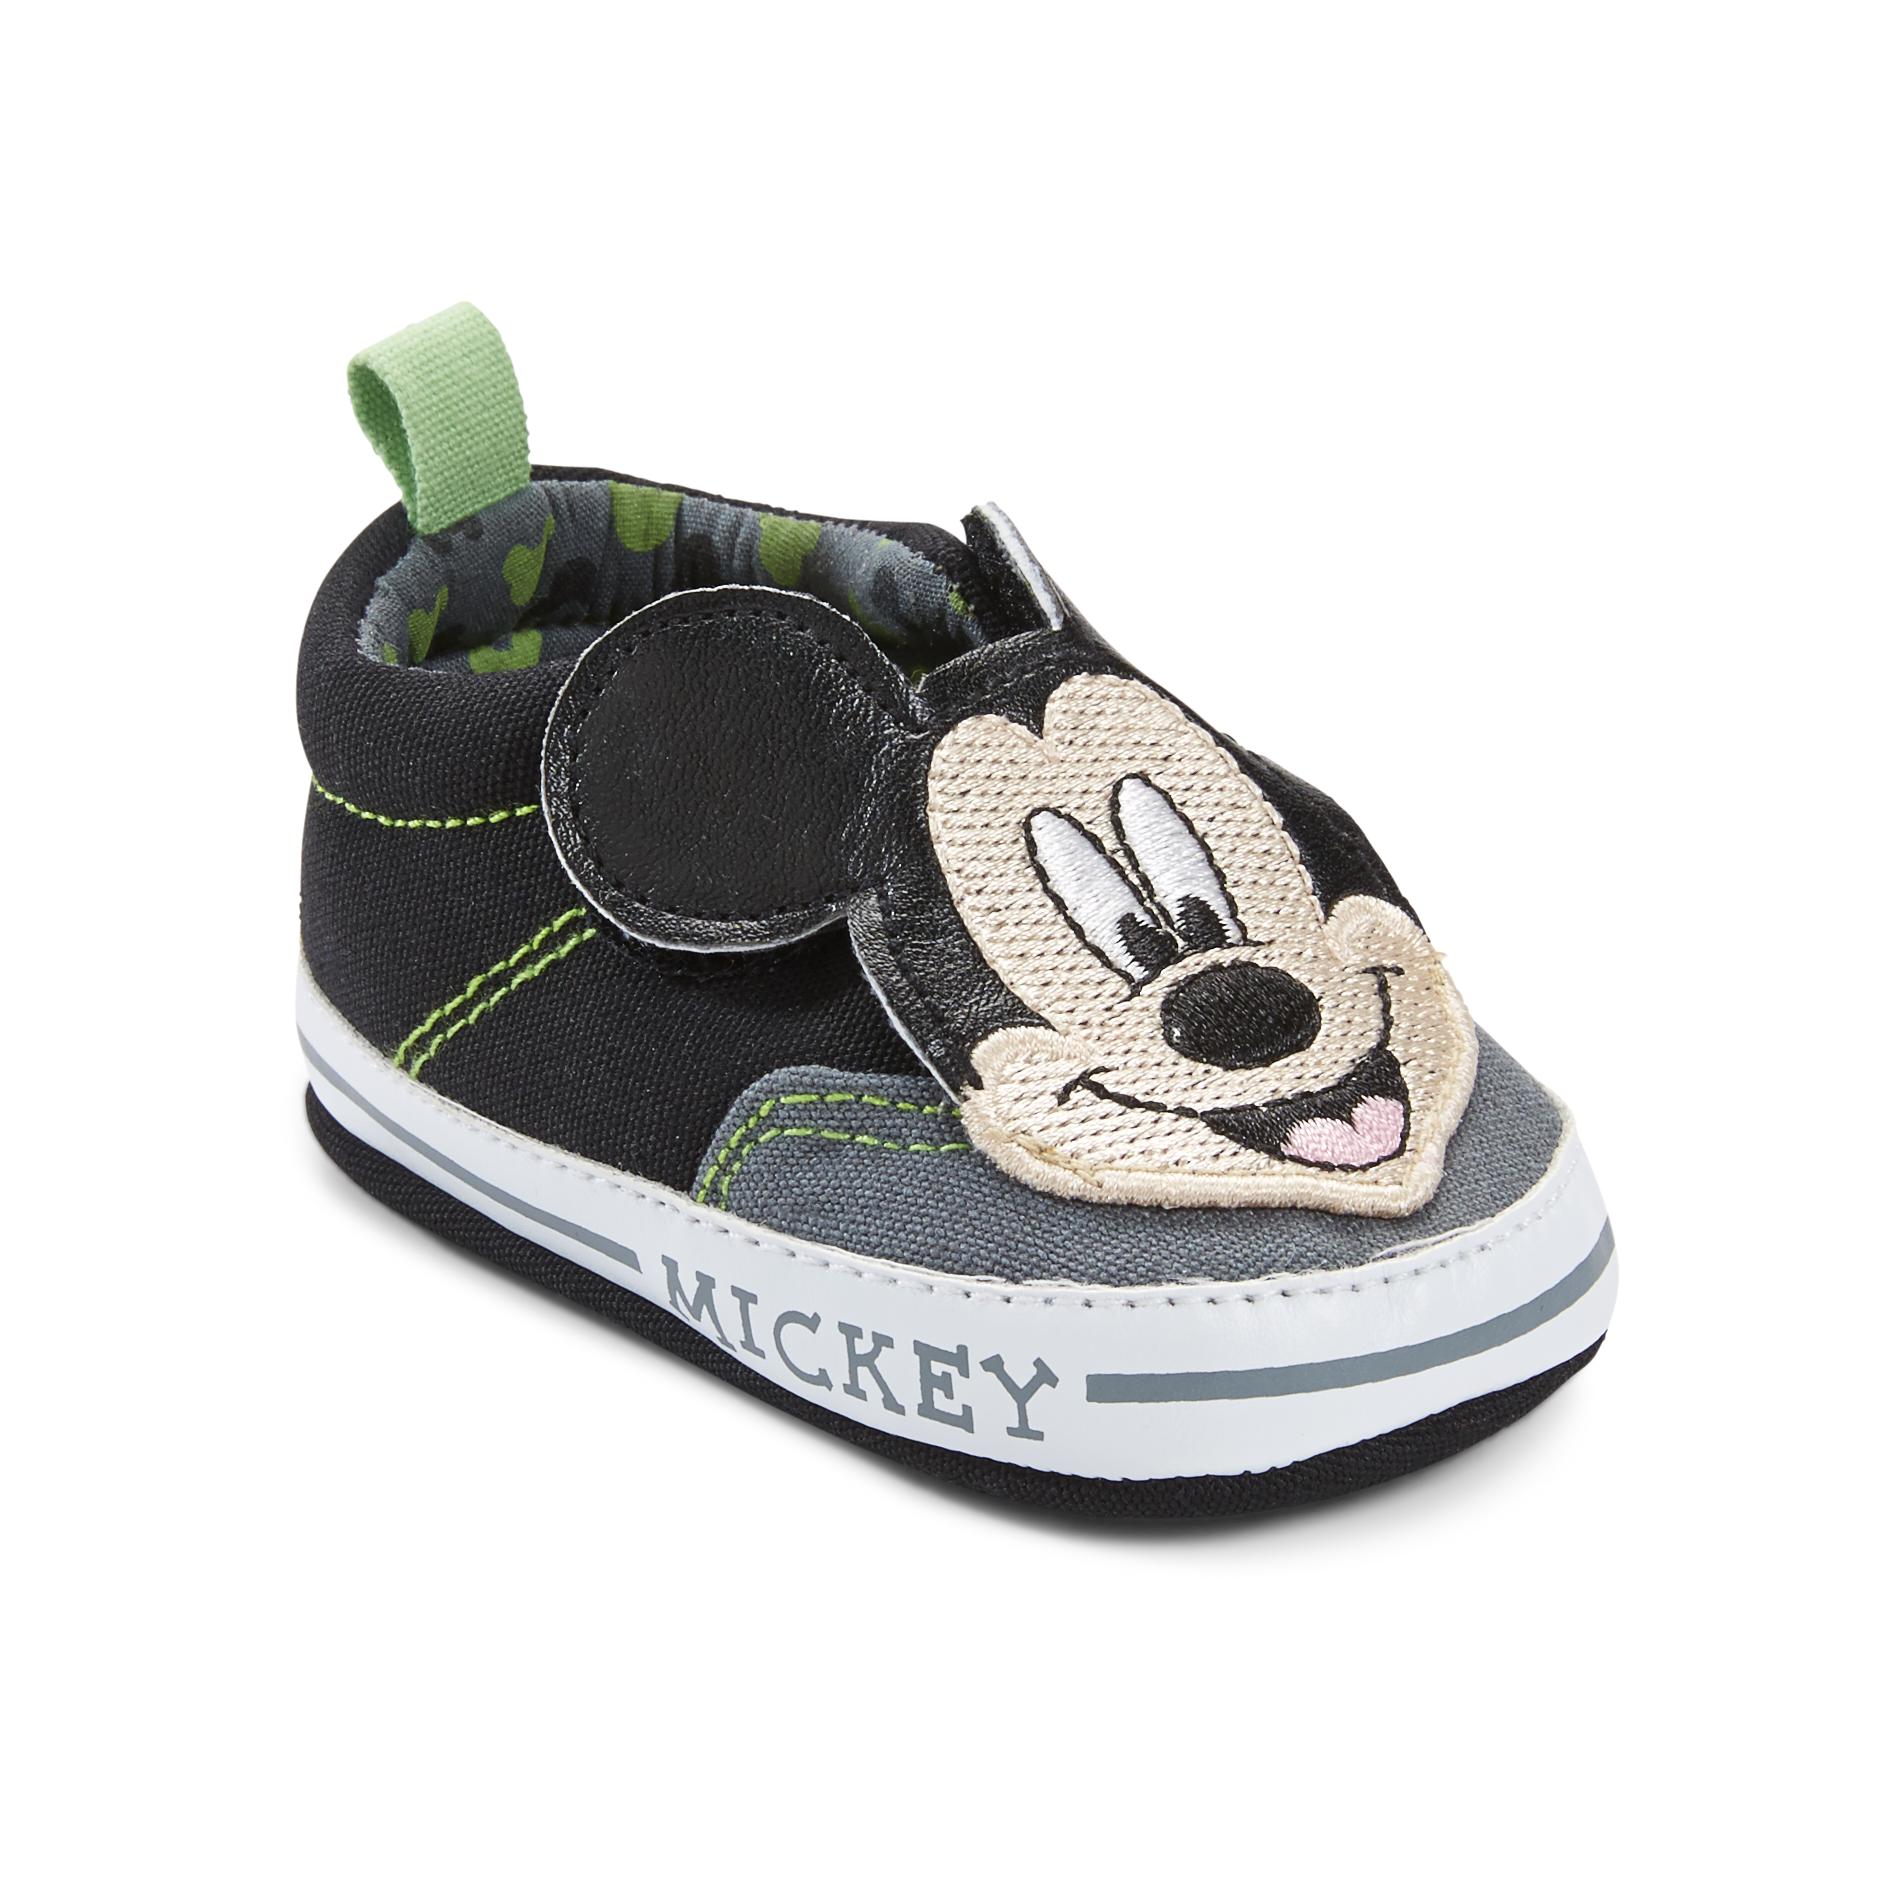 Disney Mickey Mouse Baby/Toddler Boy's Sneaker-Style Bootie